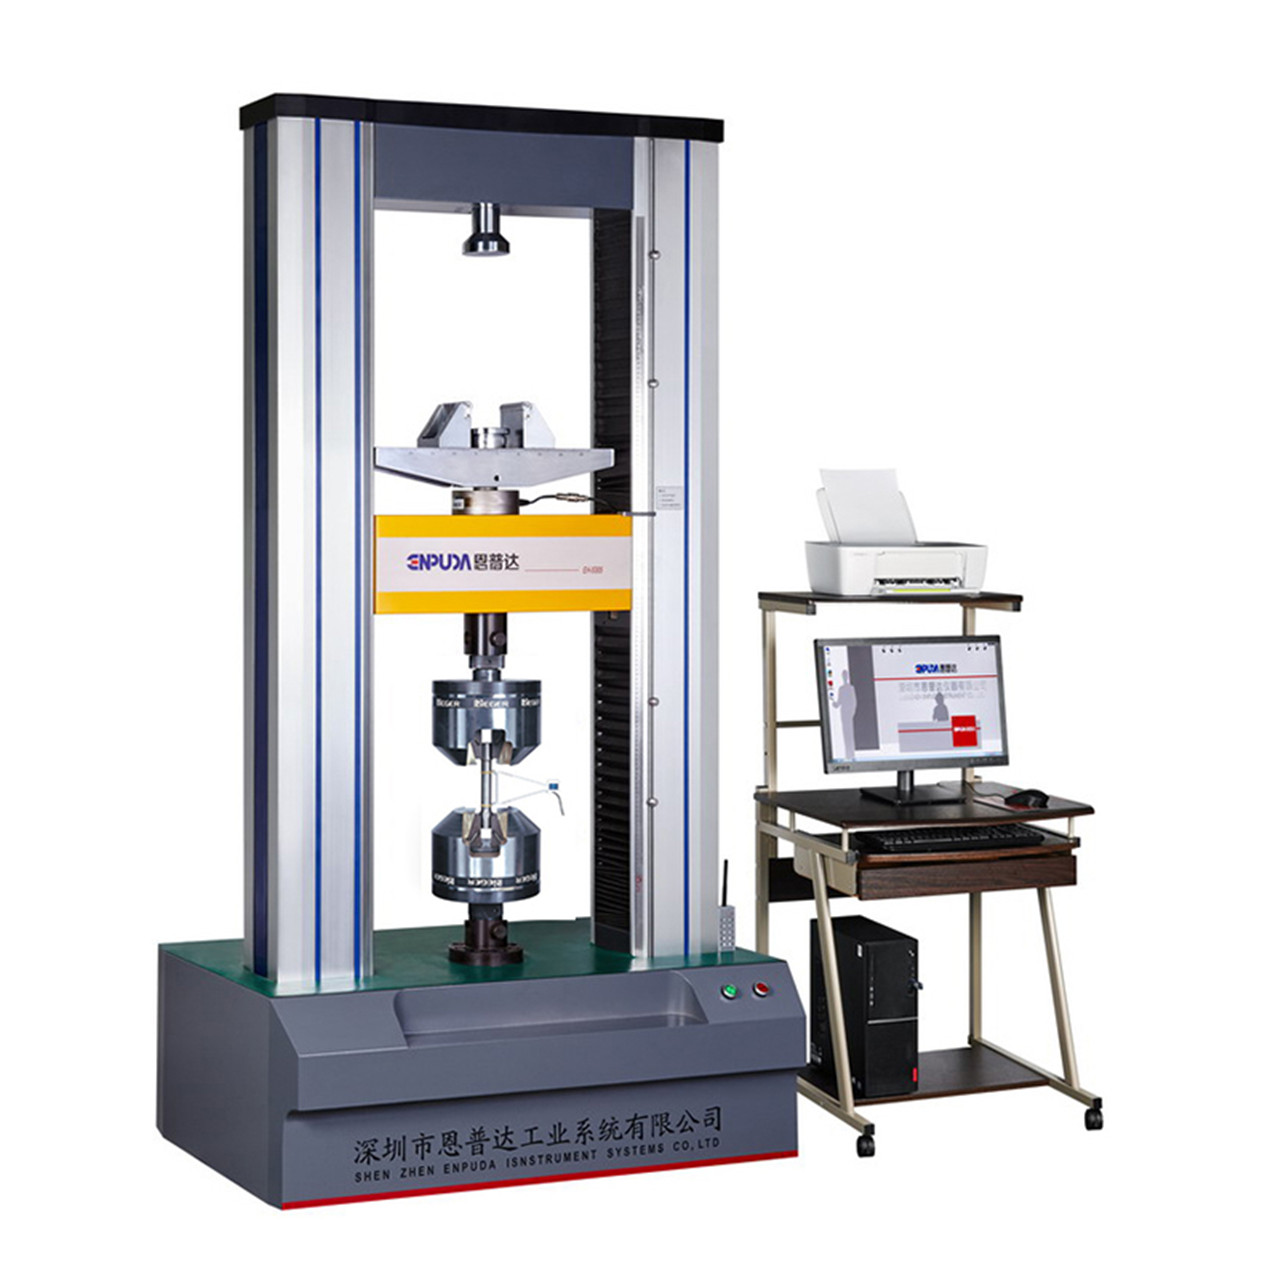 https://www.epd-instrument.com/high-and-low-teMperature-electronics-niversal-testing-machine-product/